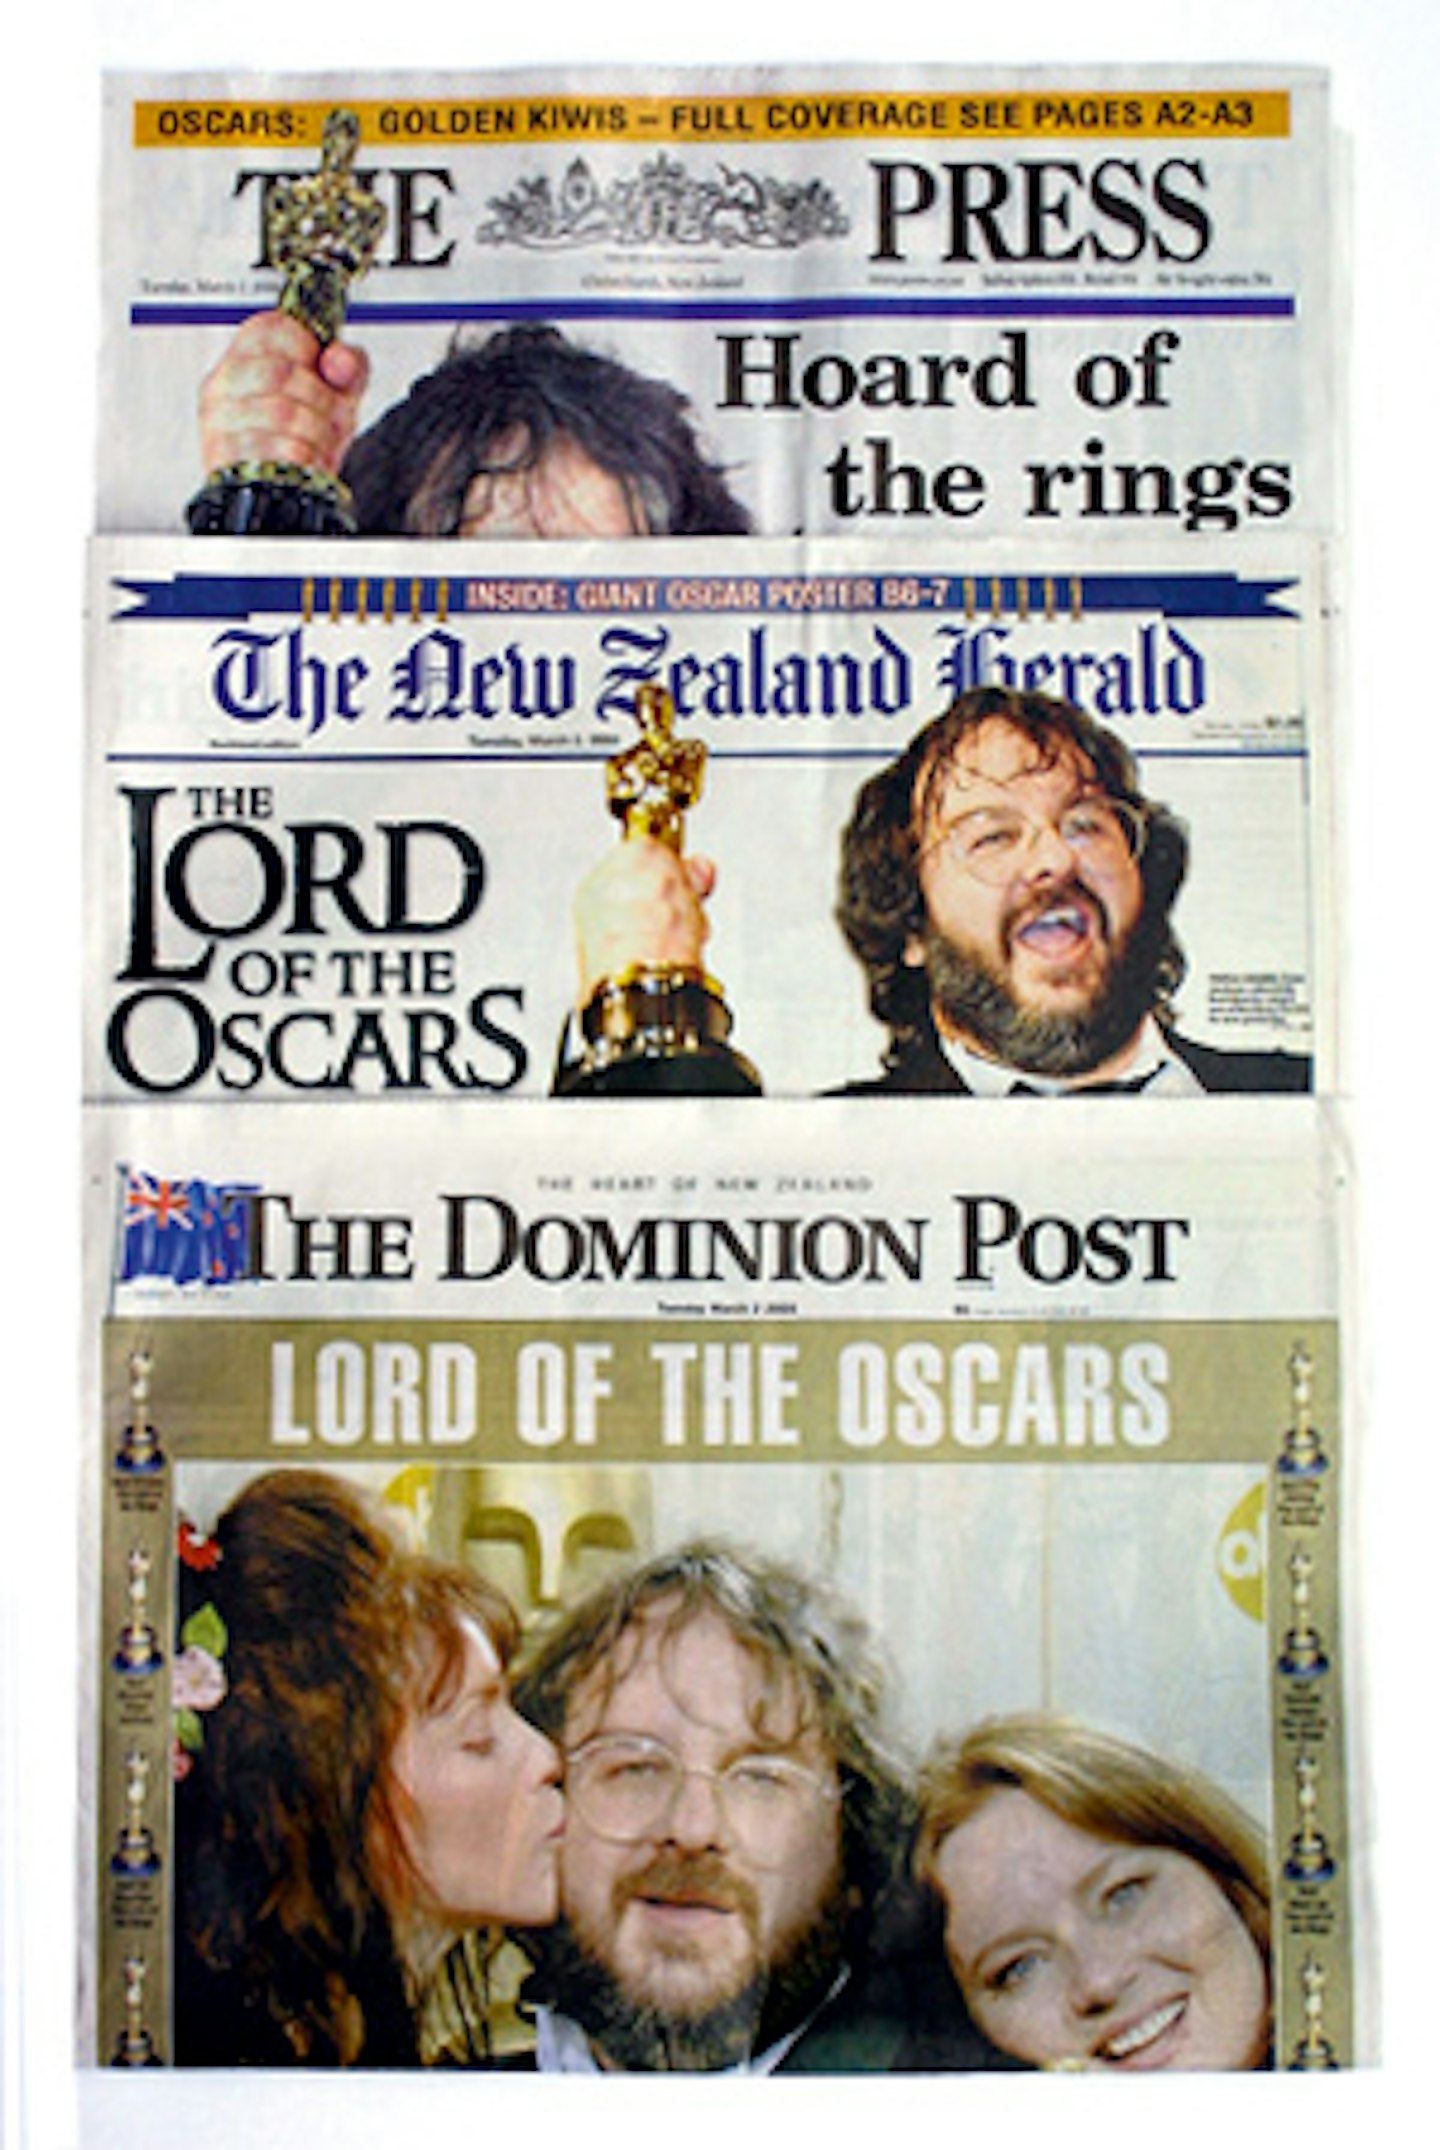 Lord of the Rings Fans - One day on a cold winter night, this man stood on  stage to receive 11 Oscars at the same time! He gave the world the greatest